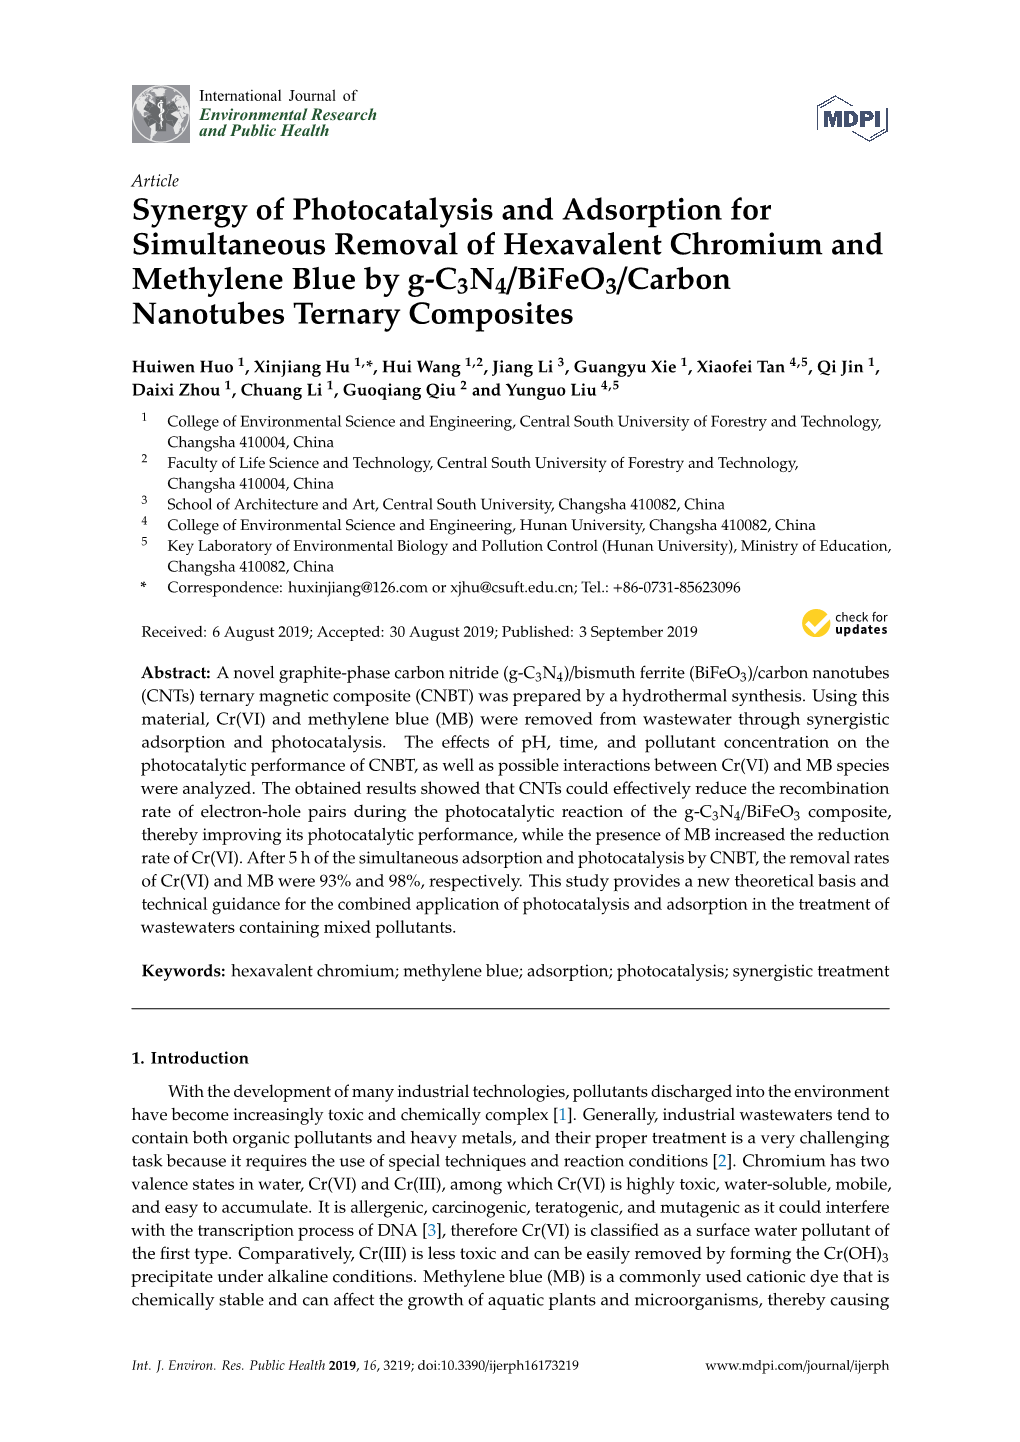 Synergy of Photocatalysis and Adsorption for Simultaneous Removal of Hexavalent Chromium and Methylene Blue by G-C3N4/Bifeo3/Carbon Nanotubes Ternary Composites